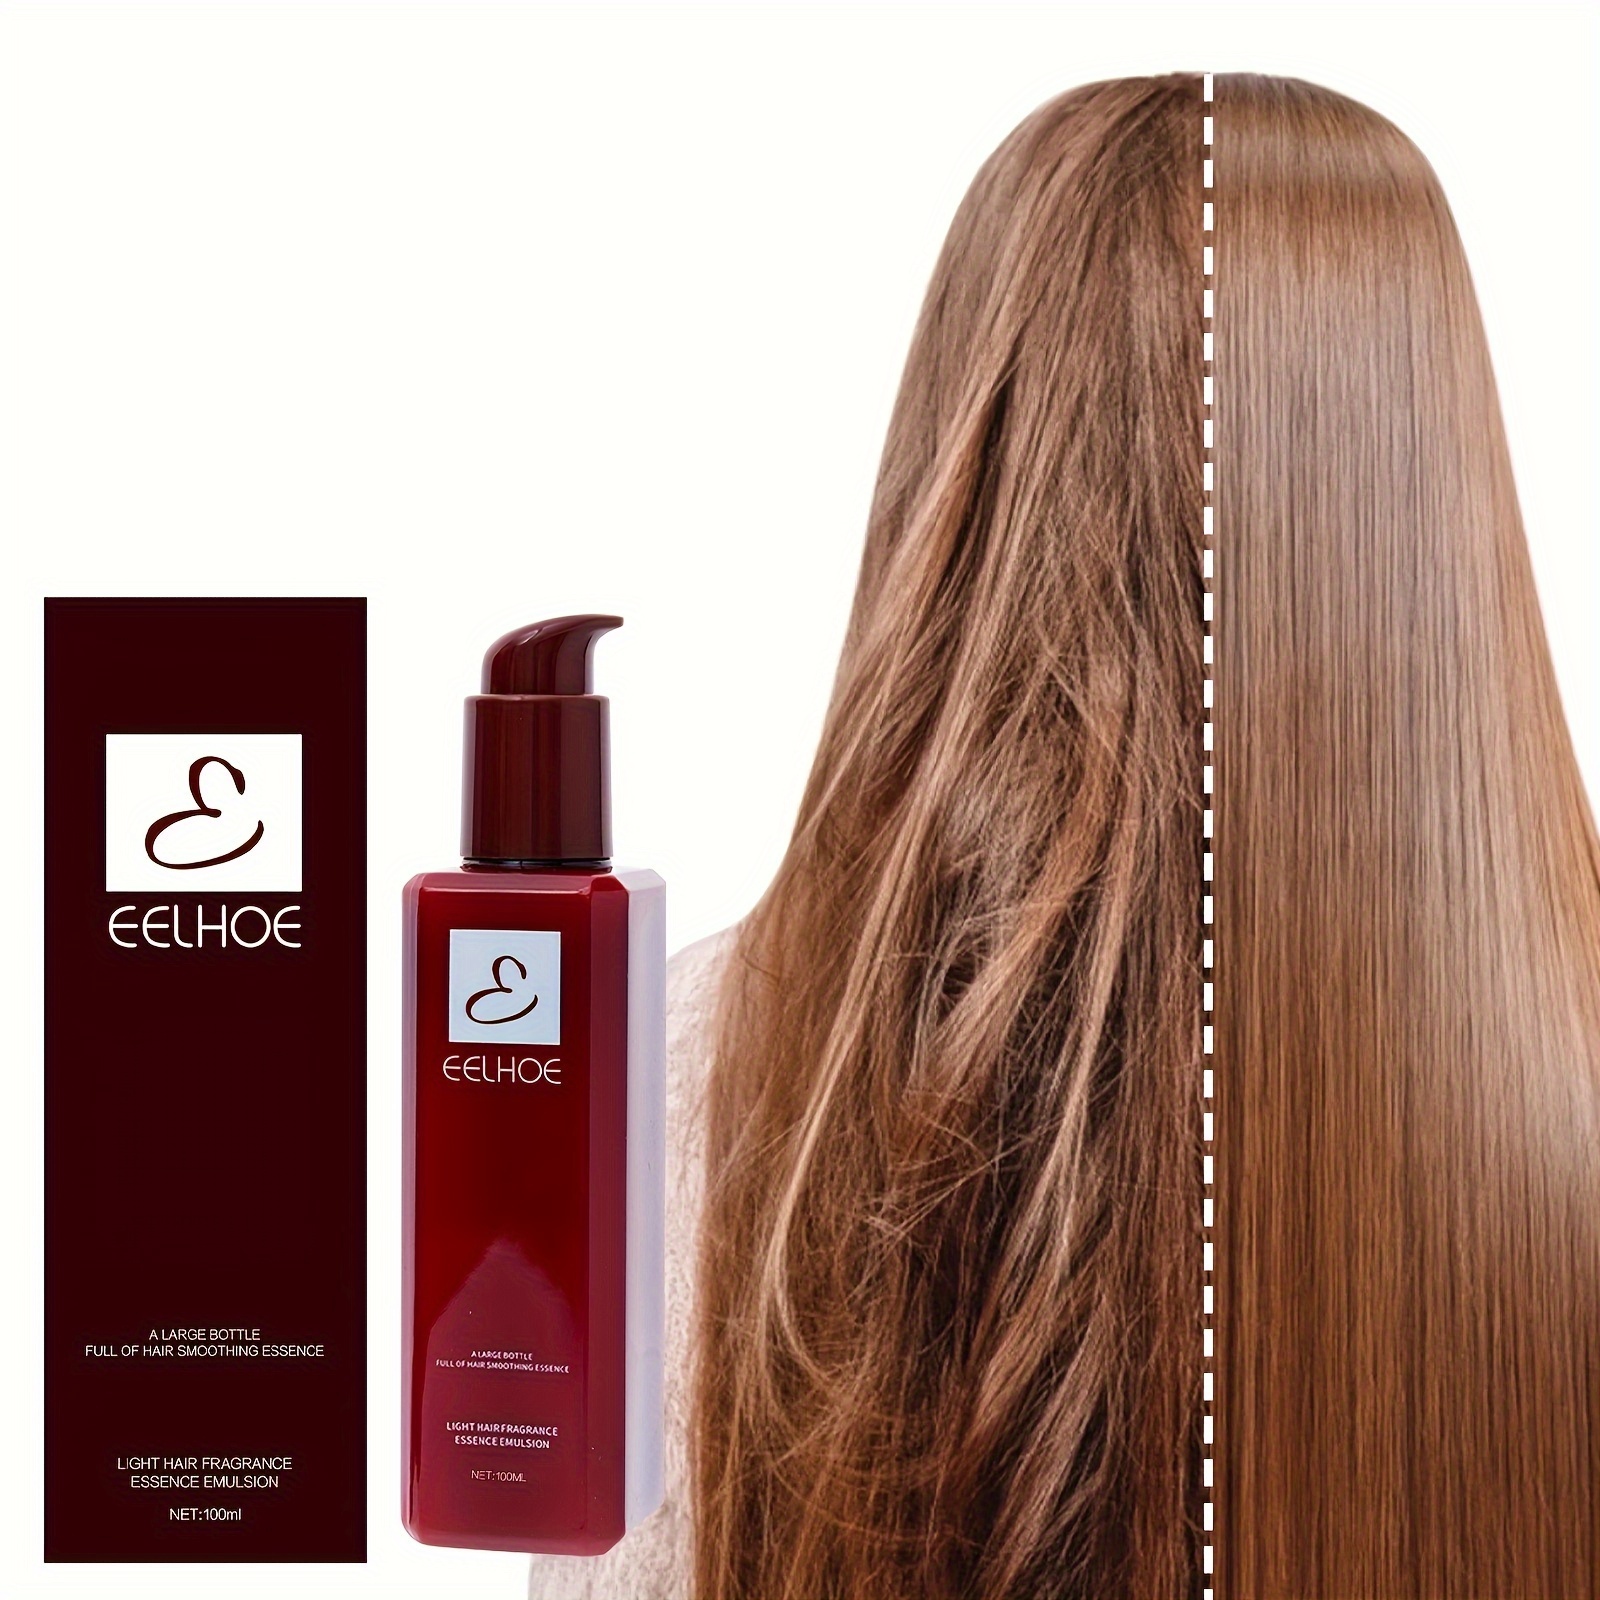 

100ml Hair Smoothing Essence - Moisturize, Thicken Hair With This Hair Care Serum